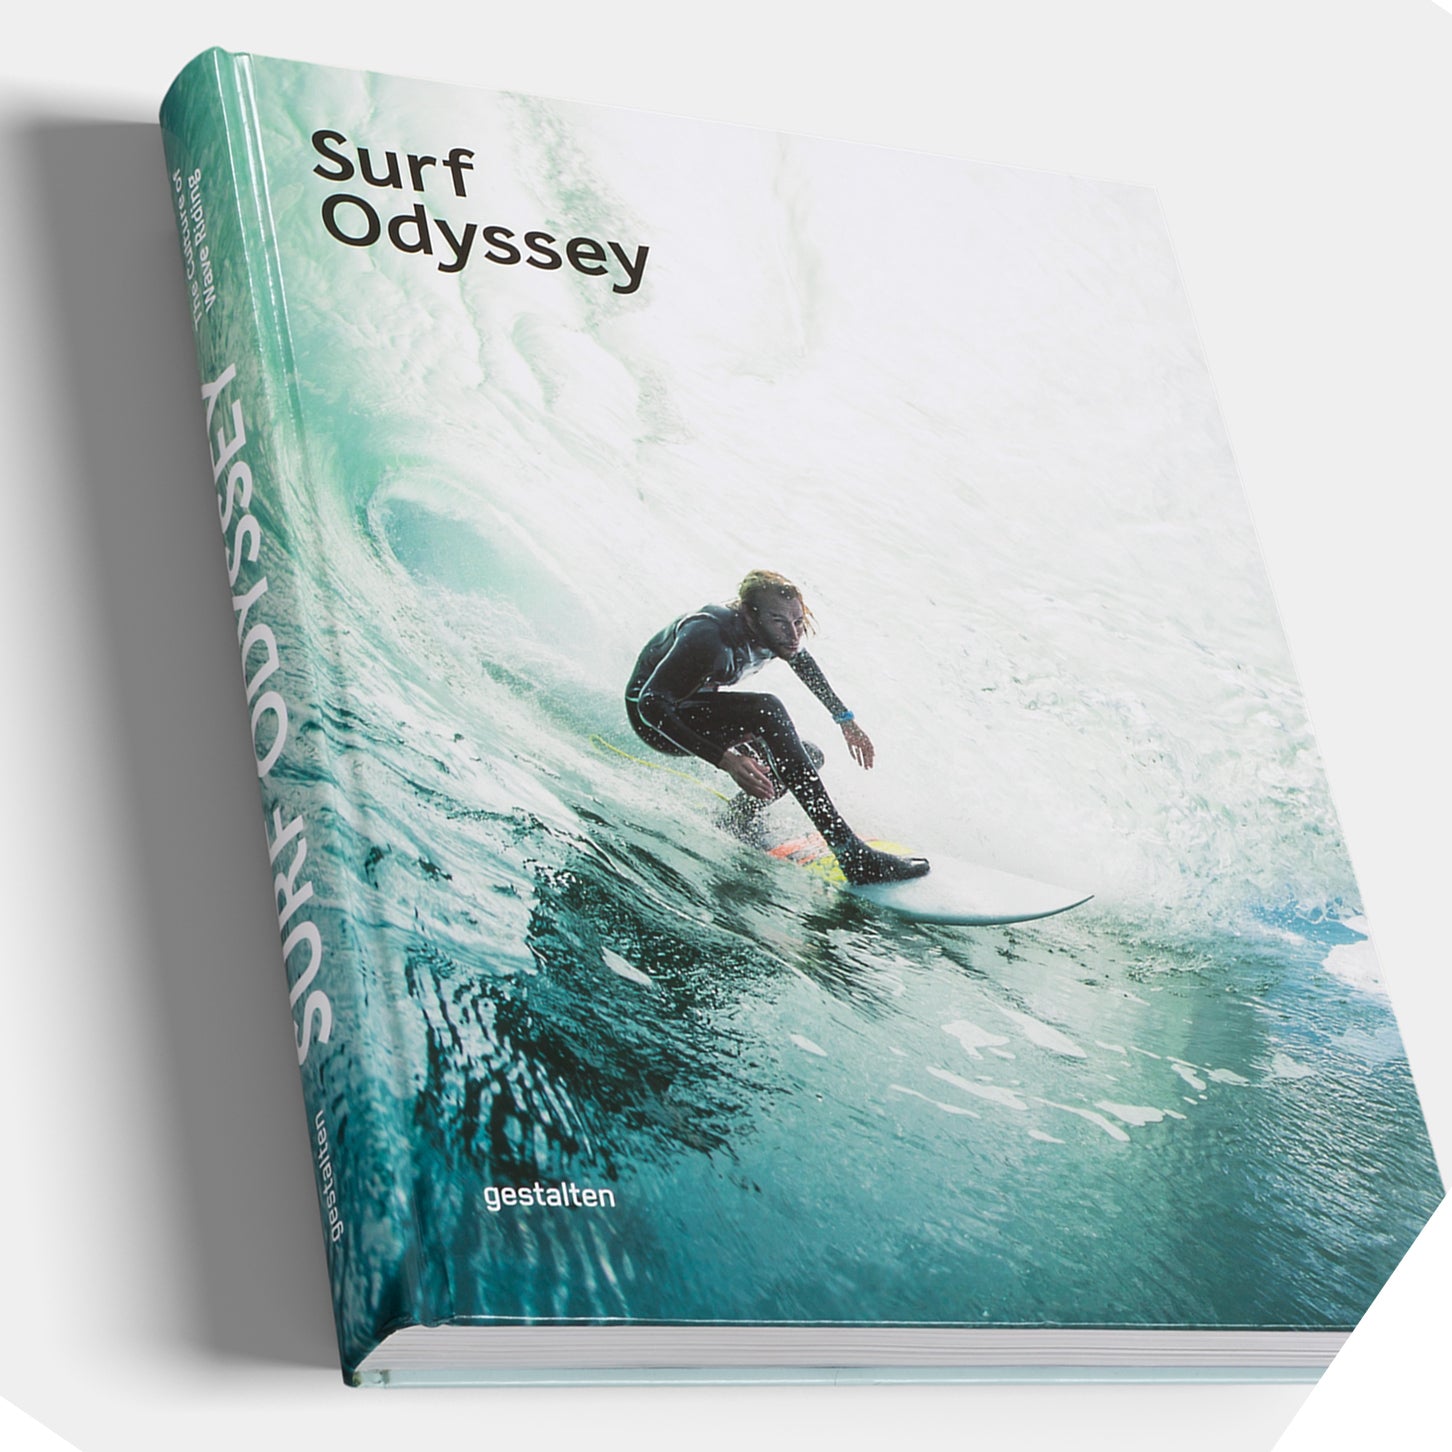 Surf Odyssey - The Culture of Wave Riding